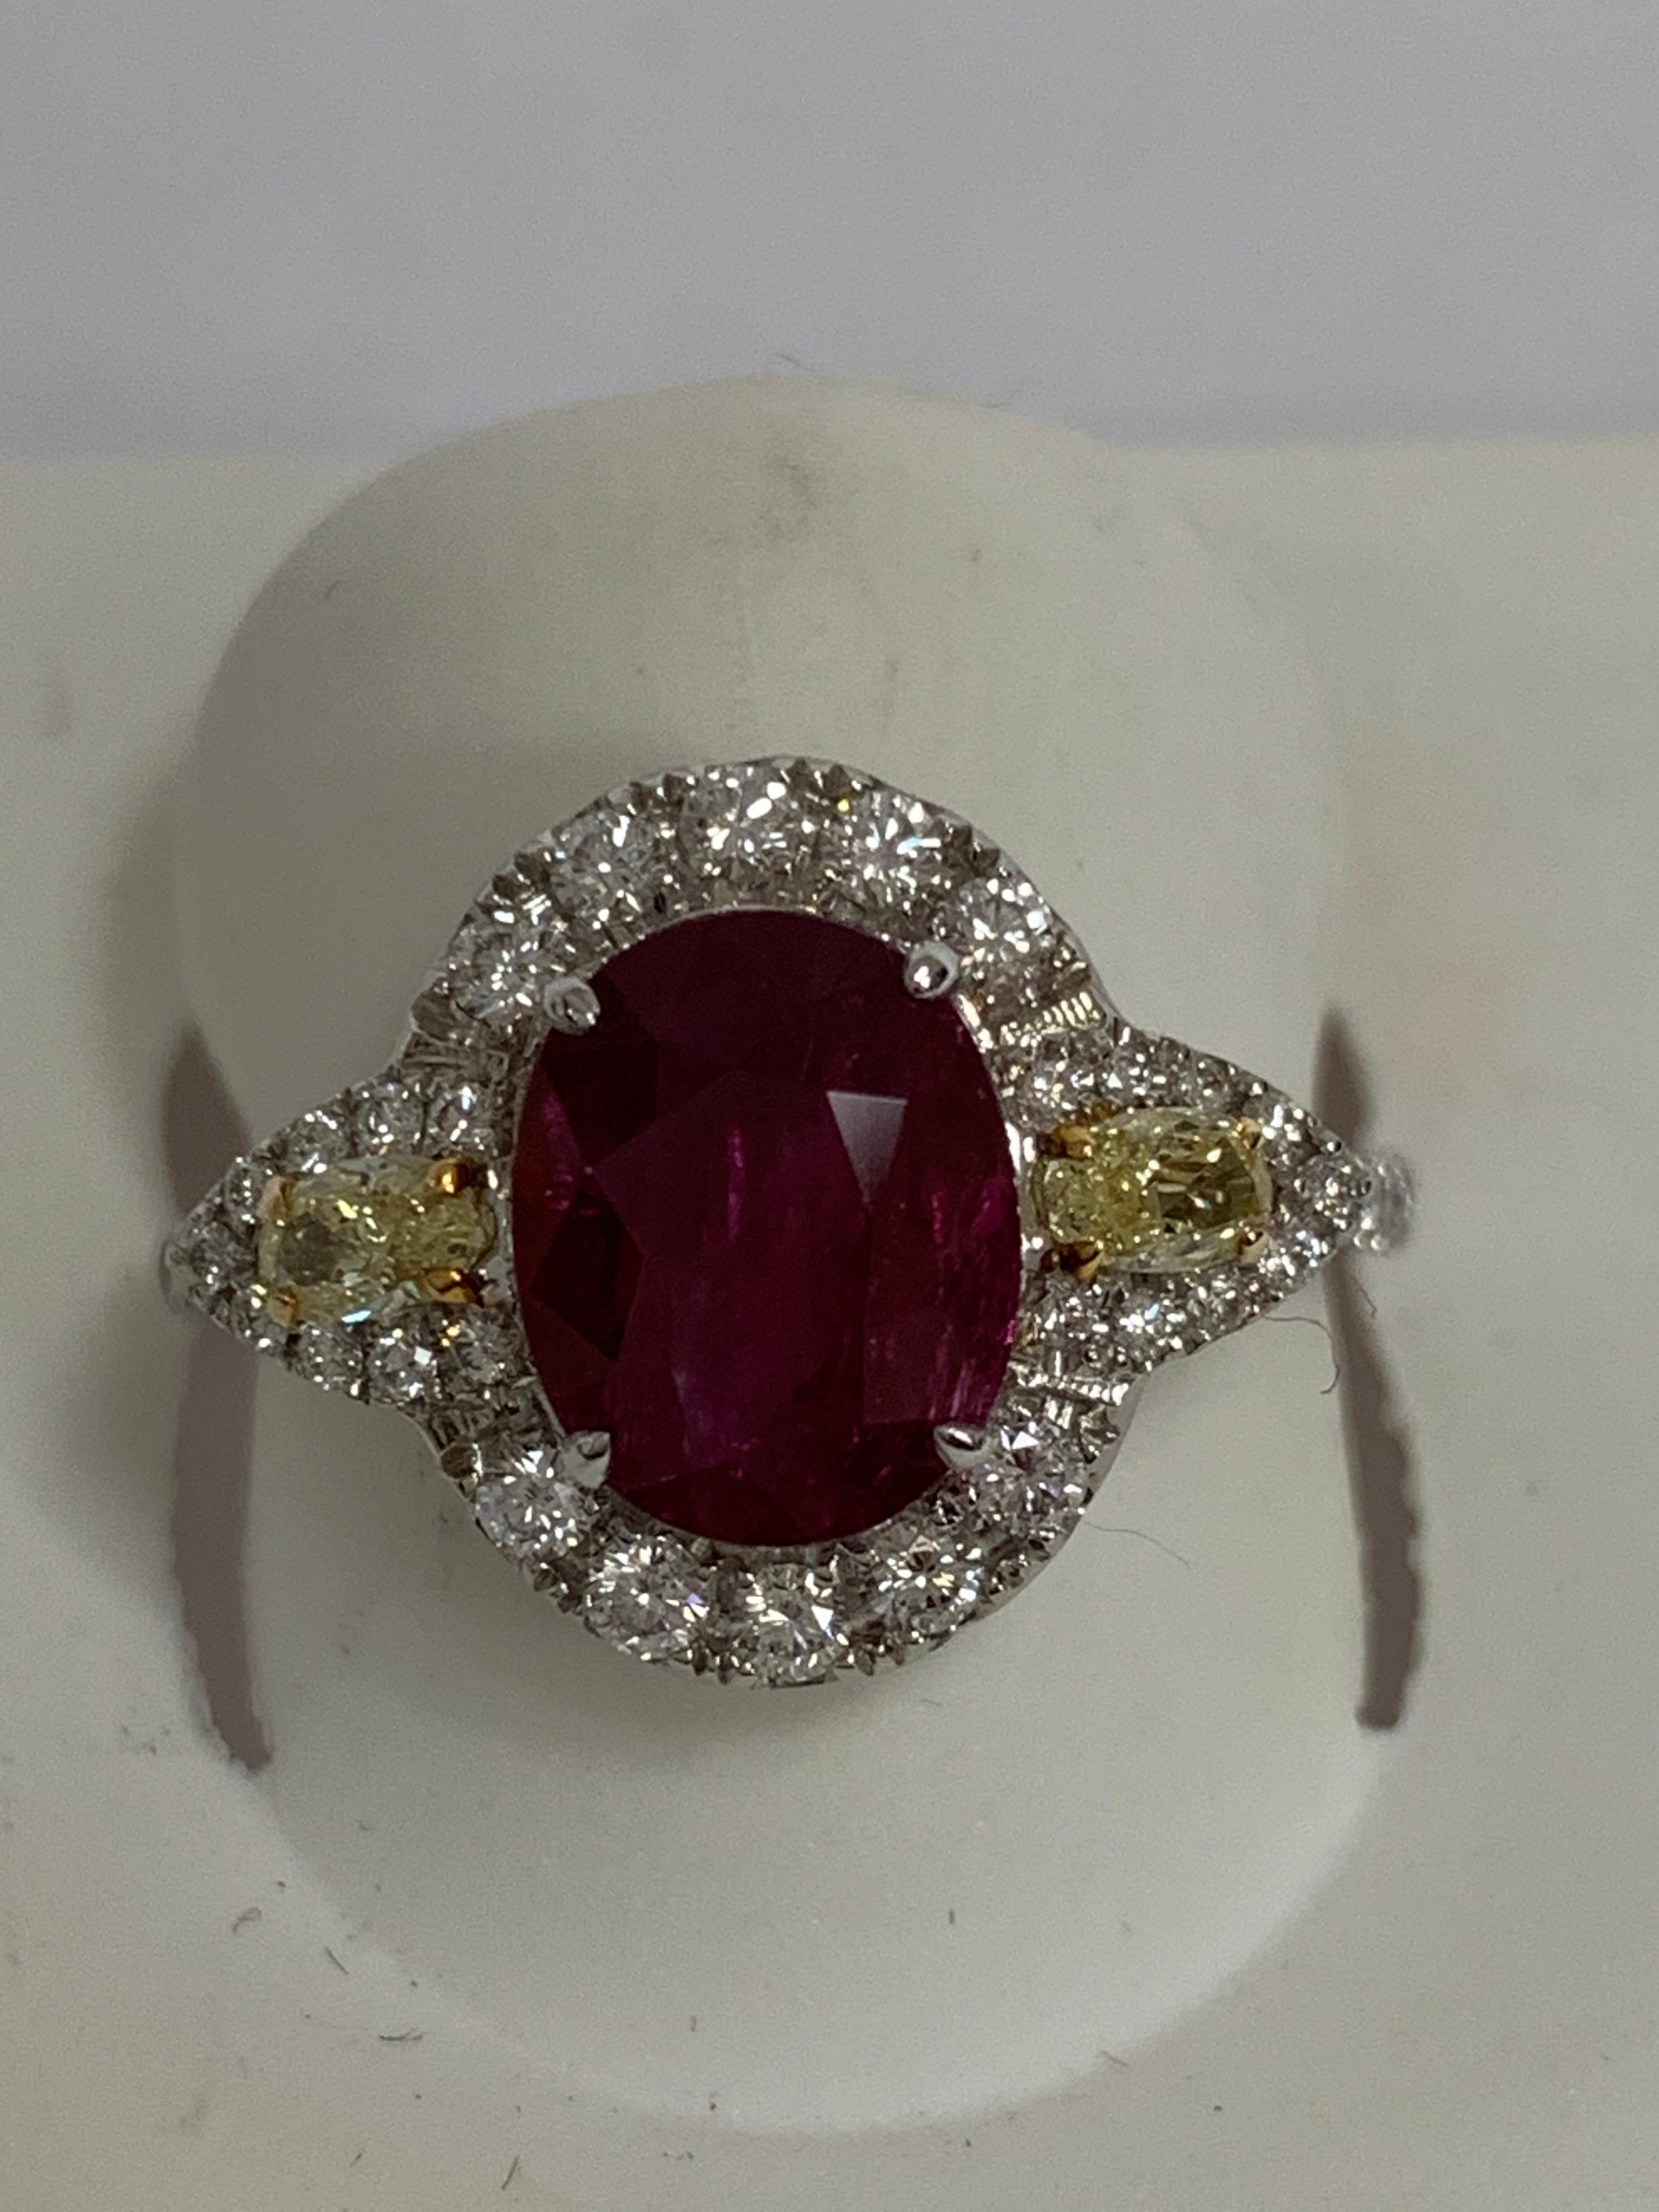 Natural Oval Ruby 1.66 Carat , yellow diamonds 0.24 and round white diamonds 0.35 Carat set in 14 karat two tone gold is one of a kind handcrafted ring. the ring is size 7 and can be resized if needed.